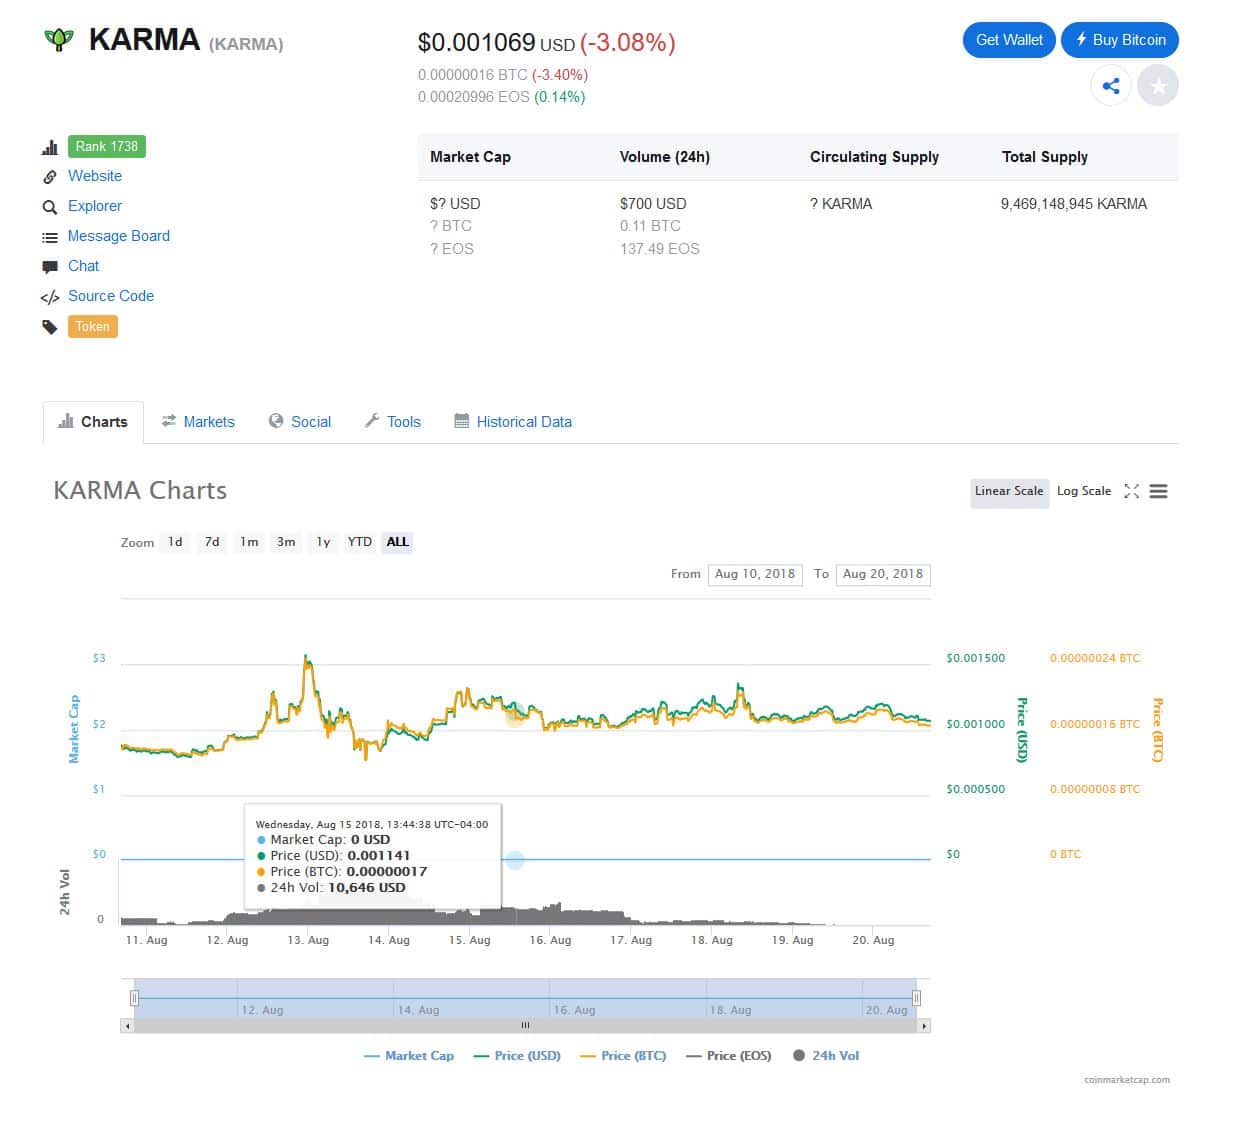  karmacoin image "width =" 1233 "height =" 1126 "srcset =" https://coincentral.com/wp-content/uploads/2018/ 08 / CoinMarketCapKarma.jpg 1233w, https: // coincentral .com / wp-content / uploads / 2018/08 / CoinMarketCapKarma-300x274.jpg 300w, https://coincentral.com/wp-content/uploads/2018/08/ CoinMarketCapKarma-768x701.jpg 768w, https: // coincentral .com / wp-content / uploads / 2018/08 / CoinMarketCapKarma-493x450.jpg 493w, https://coincentral.com/wp-content/uploads/2018/08/ CoinMarketCapKarma-600x548.jpg 600w "sizes =" (width maximum: 1233 px) 100vw, 1233 px 